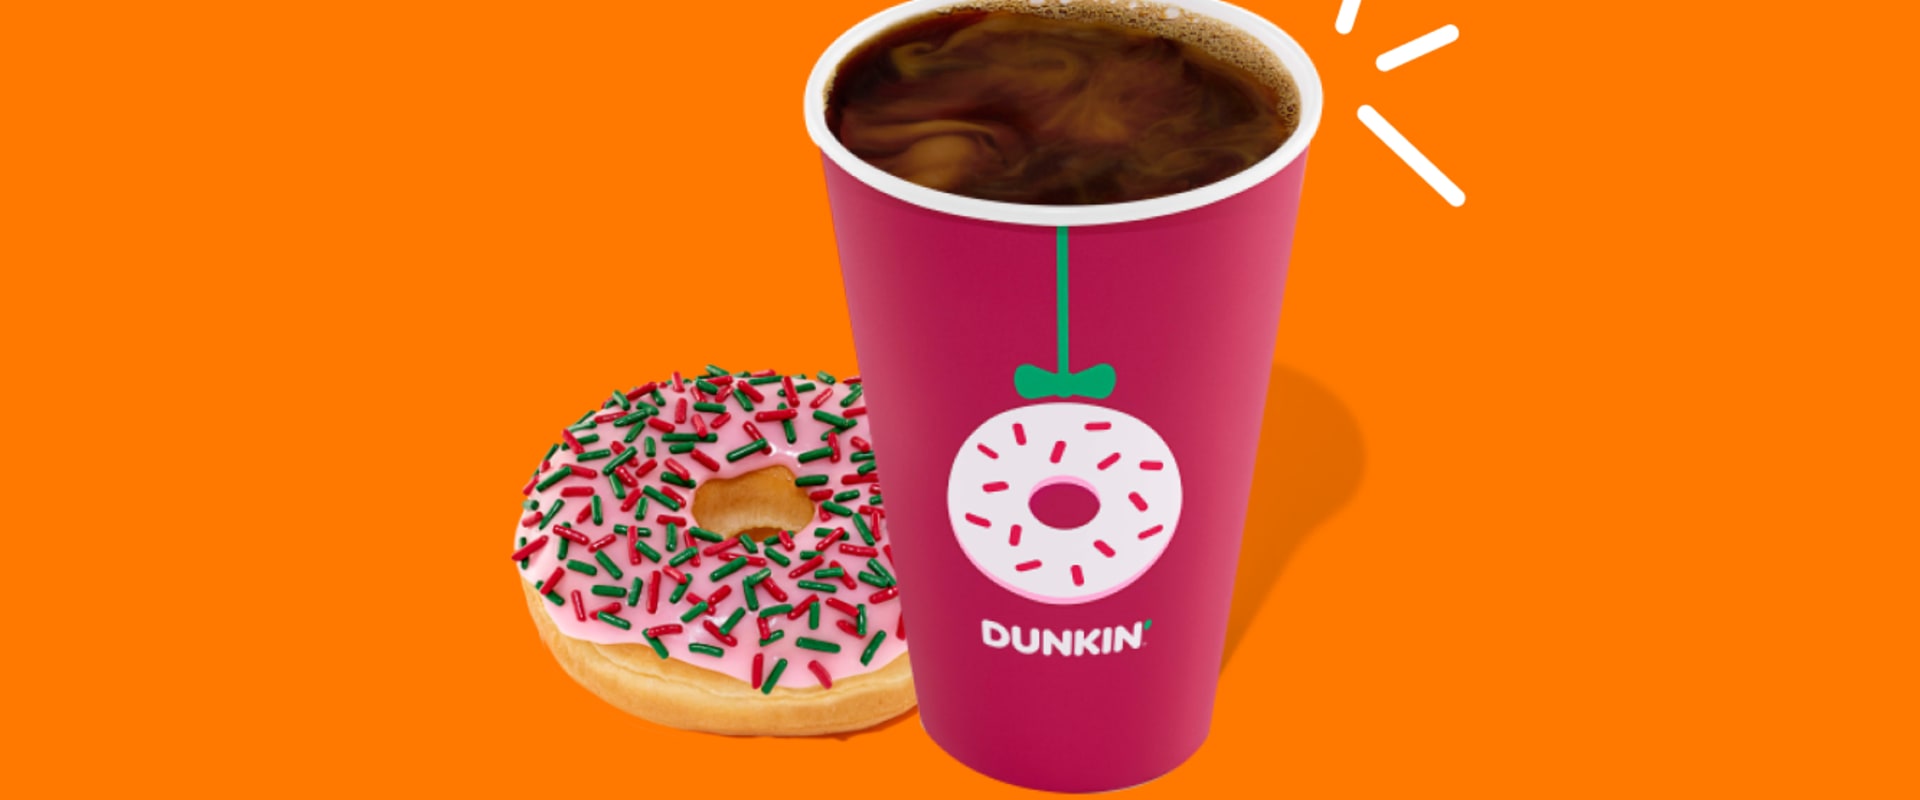 Ordering Dunkin Donuts Coffee: A Step-by-Step Guide